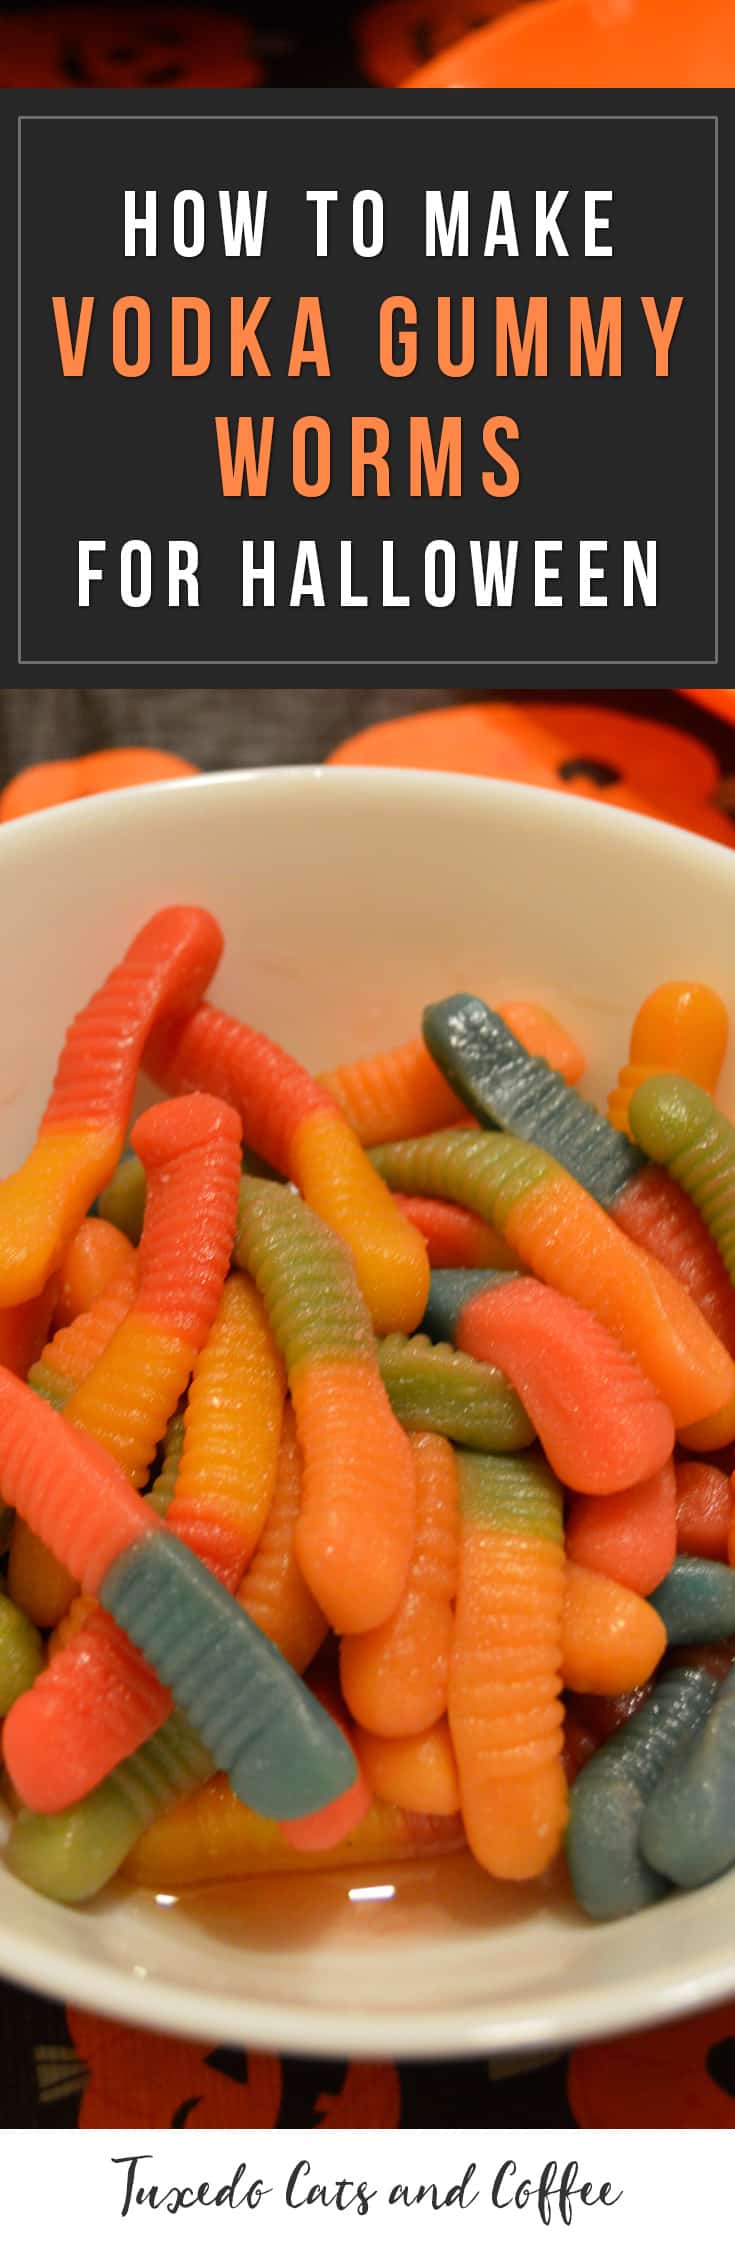 How to Make Vodka Gummy Worms for Halloween